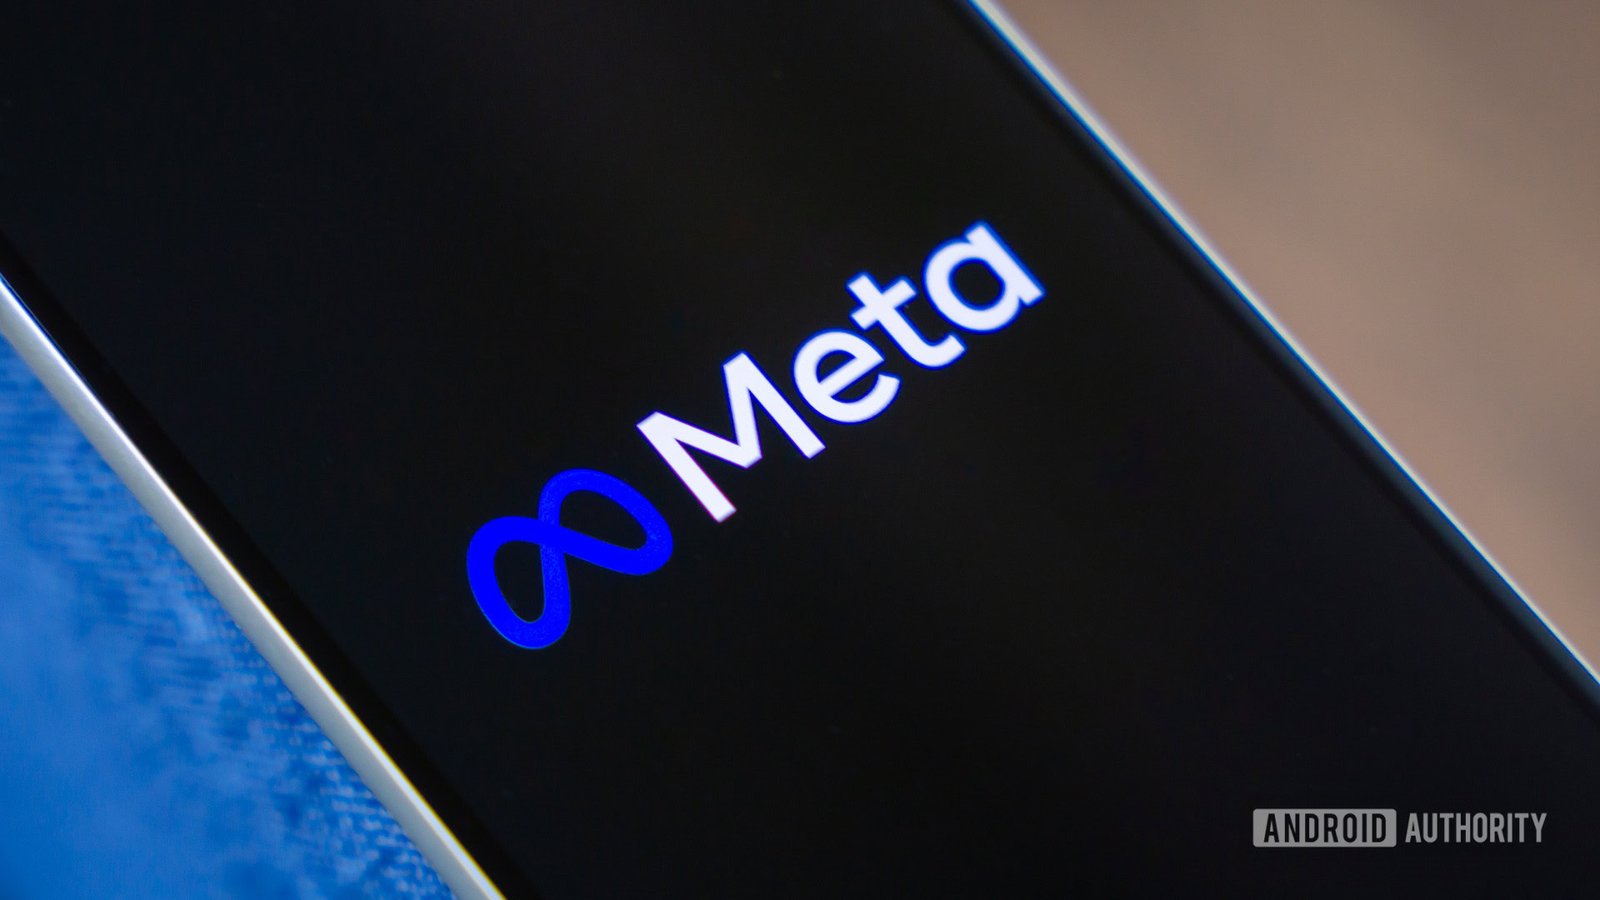 Meta’s latest Facebook and Instagram revenue model is already under legal scrutiny